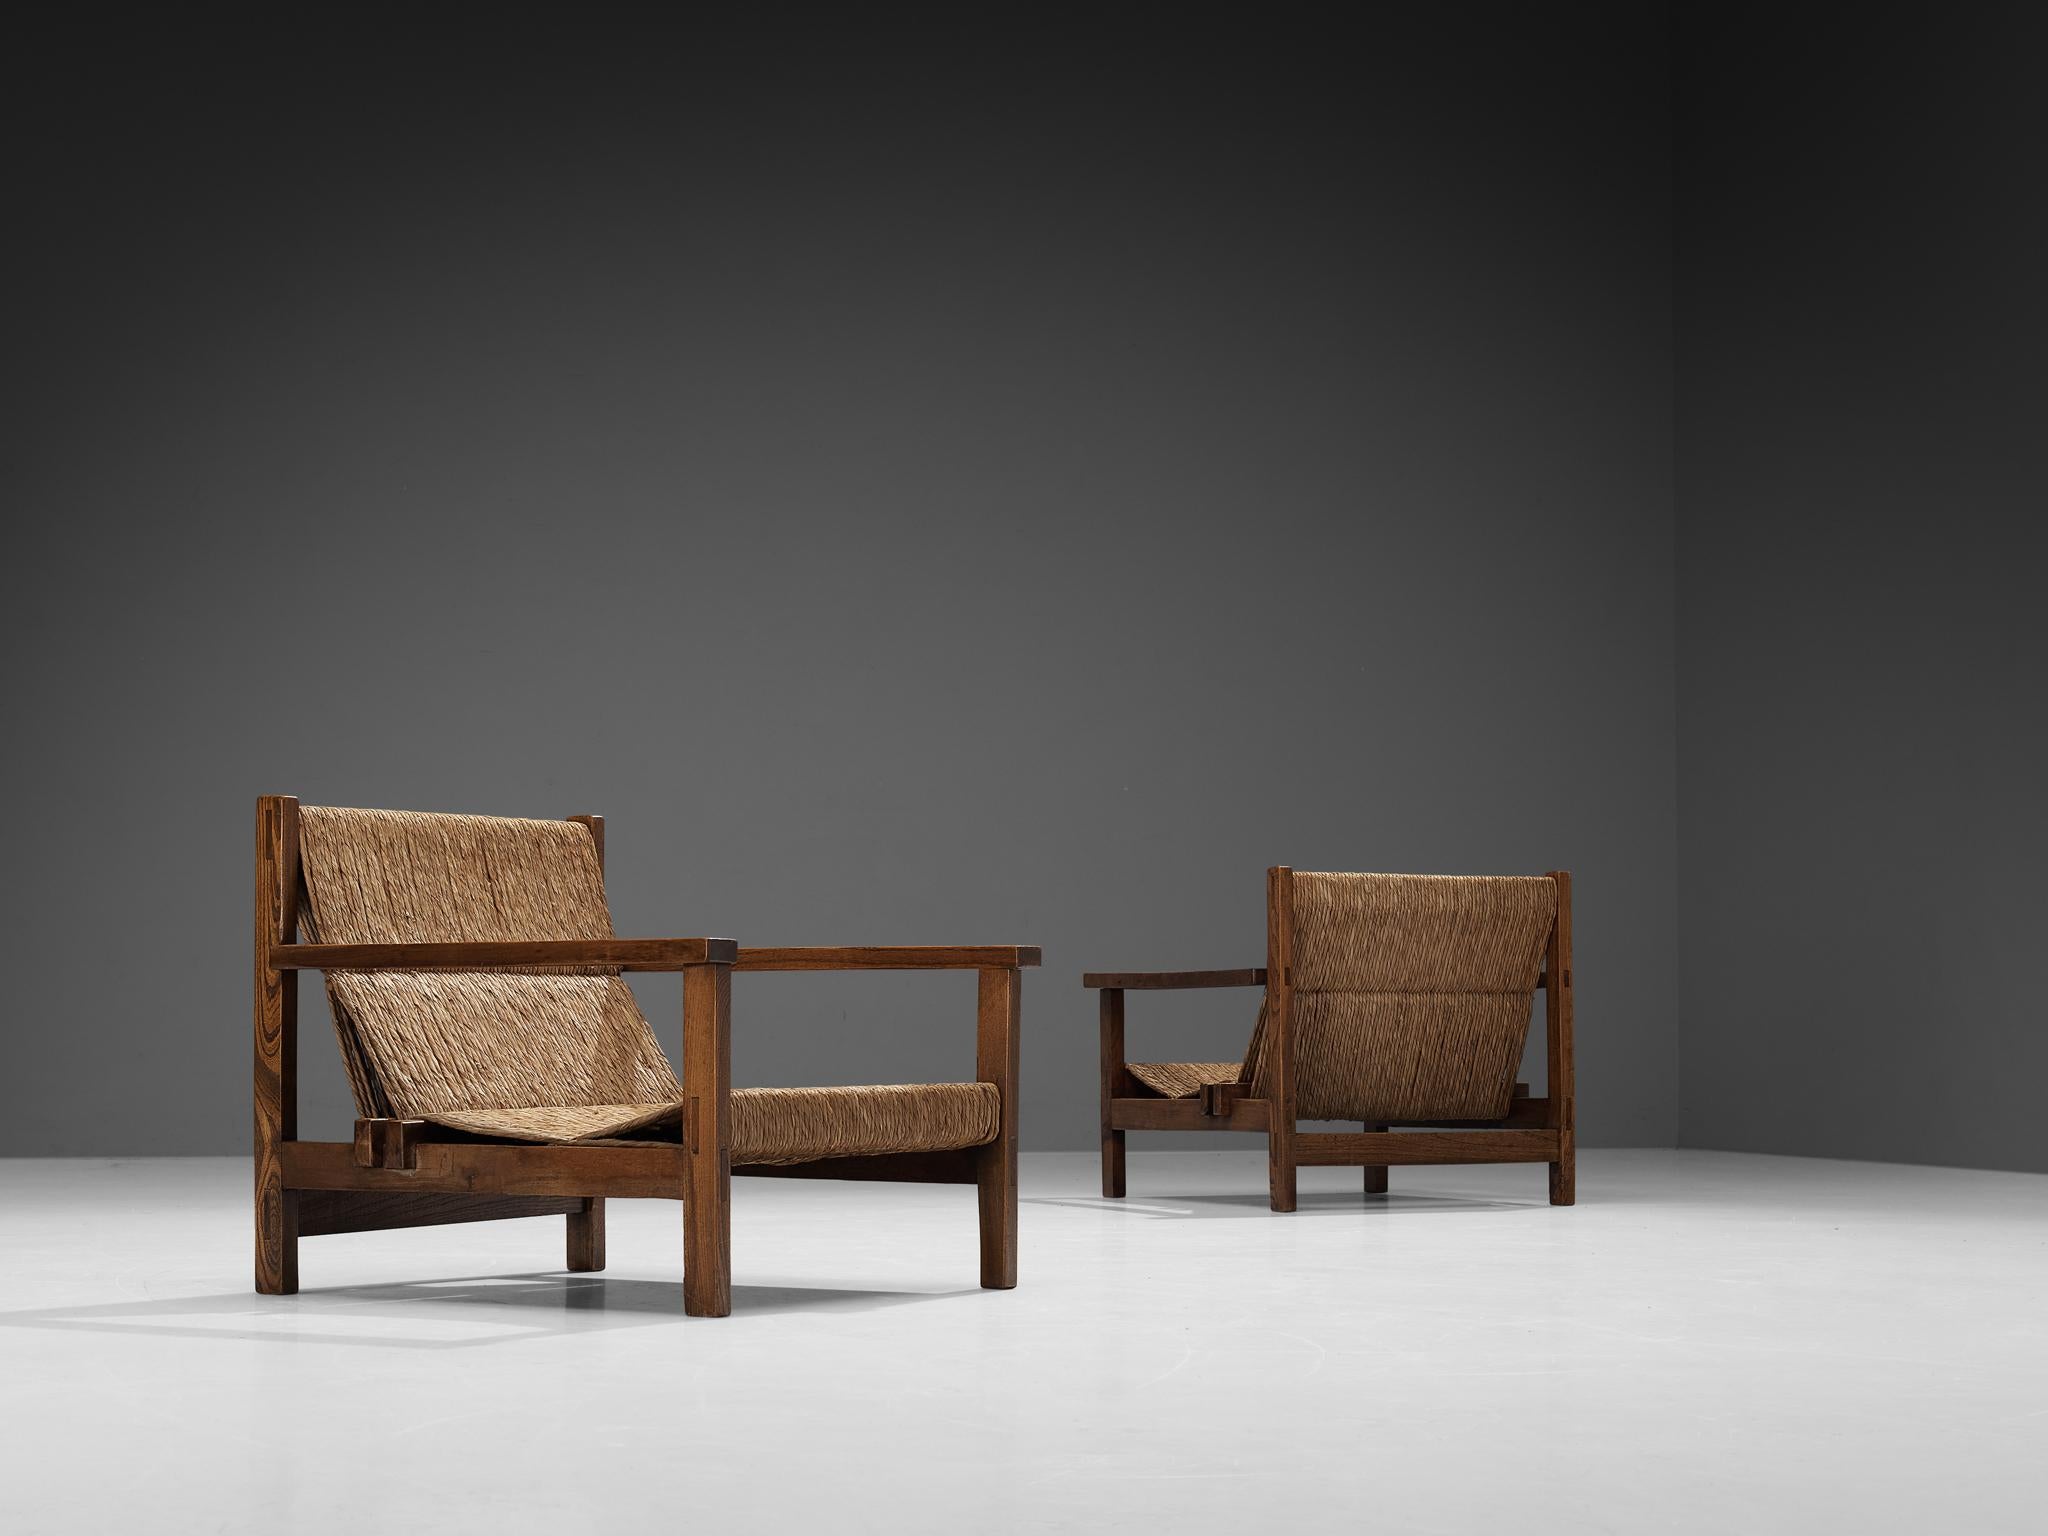 Spanish Pair of Rustic Armchairs in Stained Elm and Straw 1